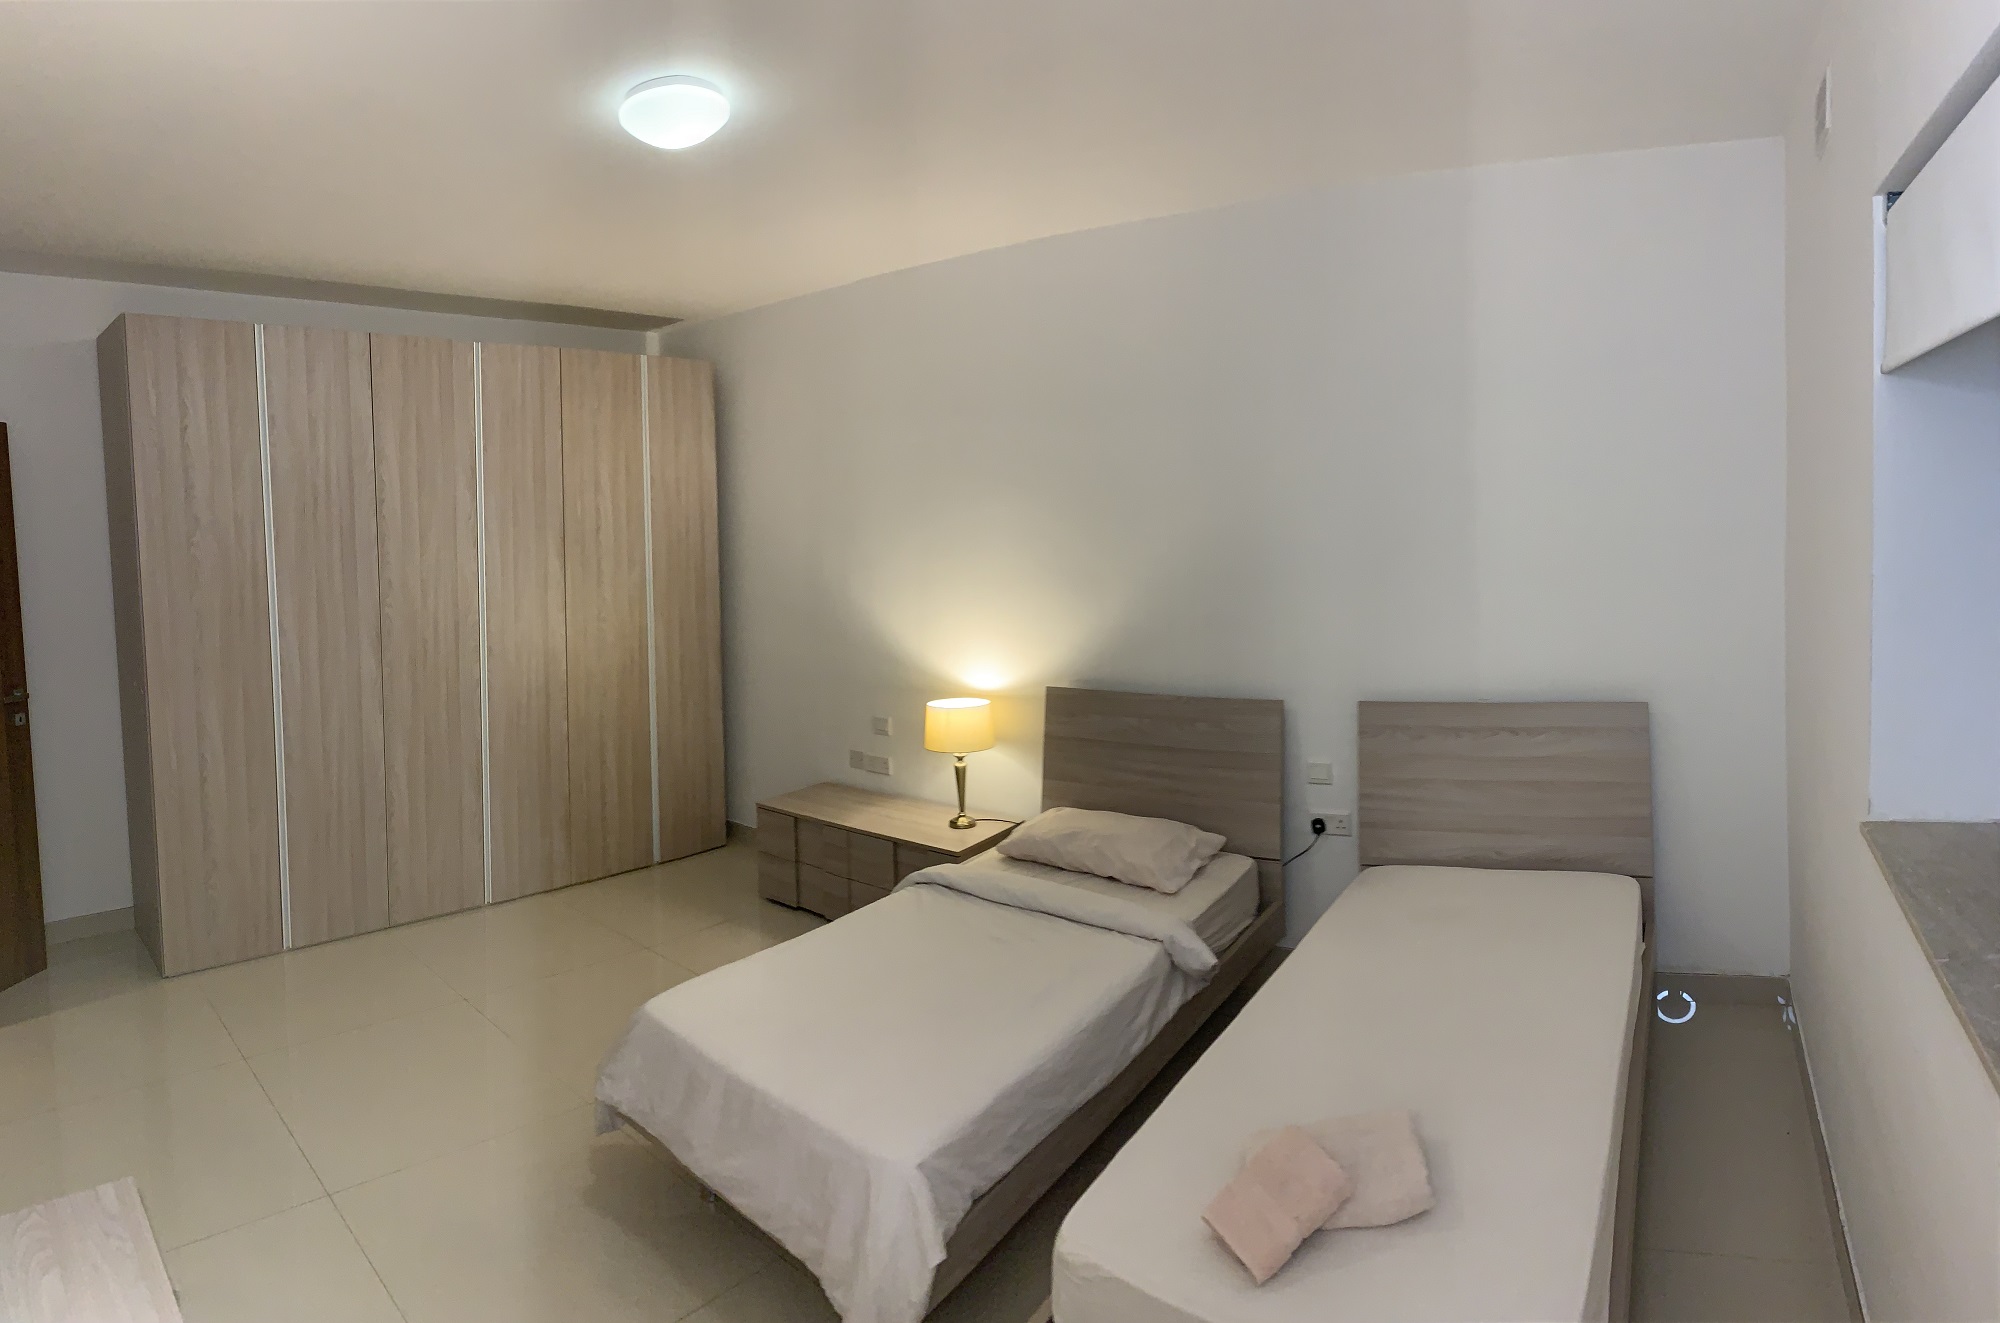 One of the shared bedrooms at the BELS Malta superior residence